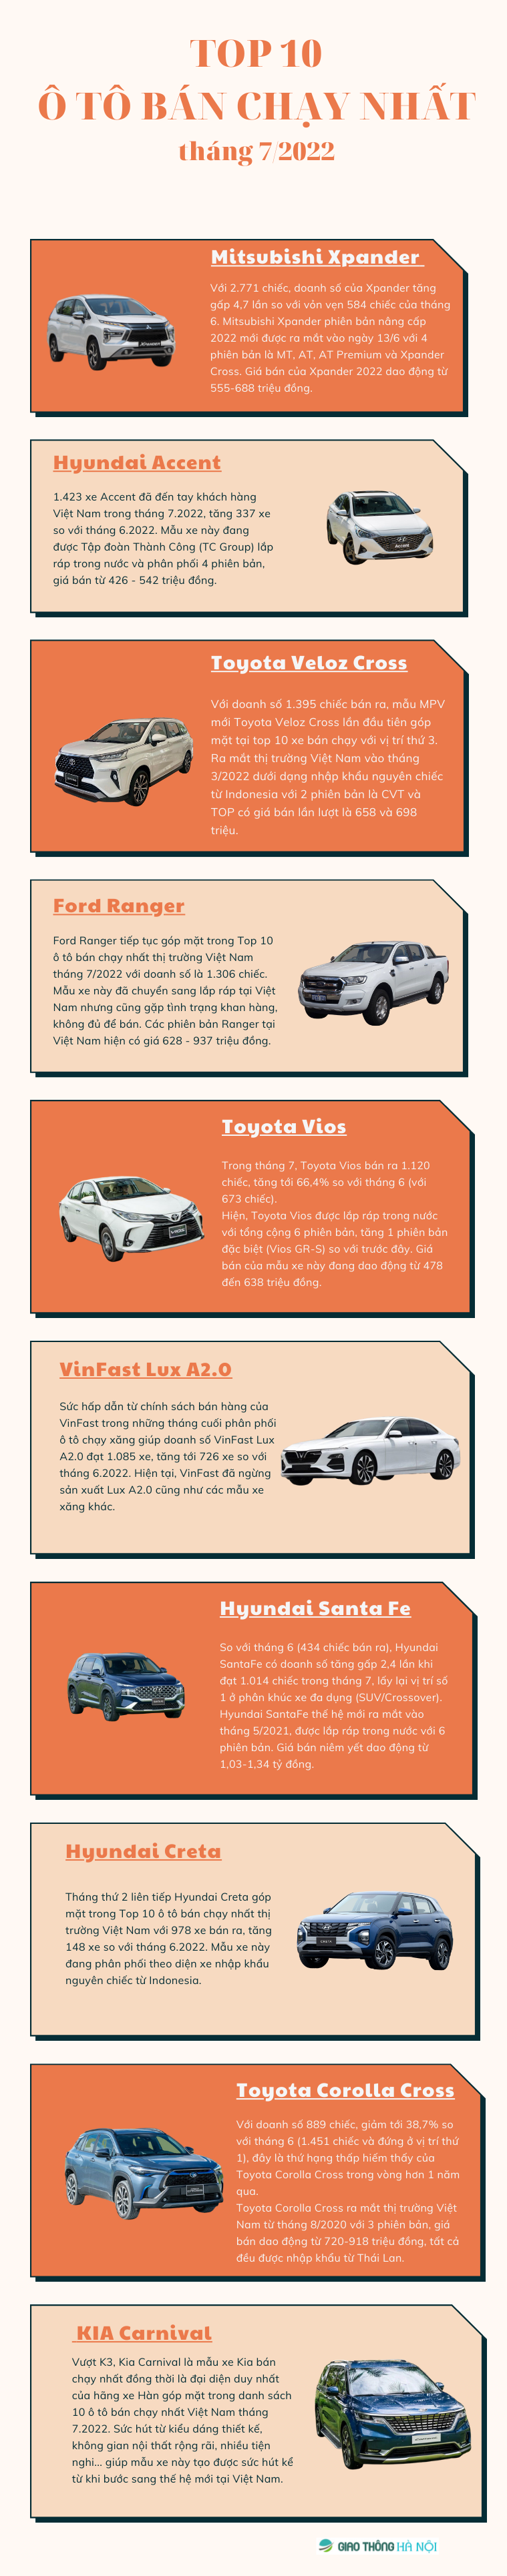 [INFOGRAPHIC]: Top 10 o to ban chay nhat Viet Nam thang 7/2022 - Hinh anh 1